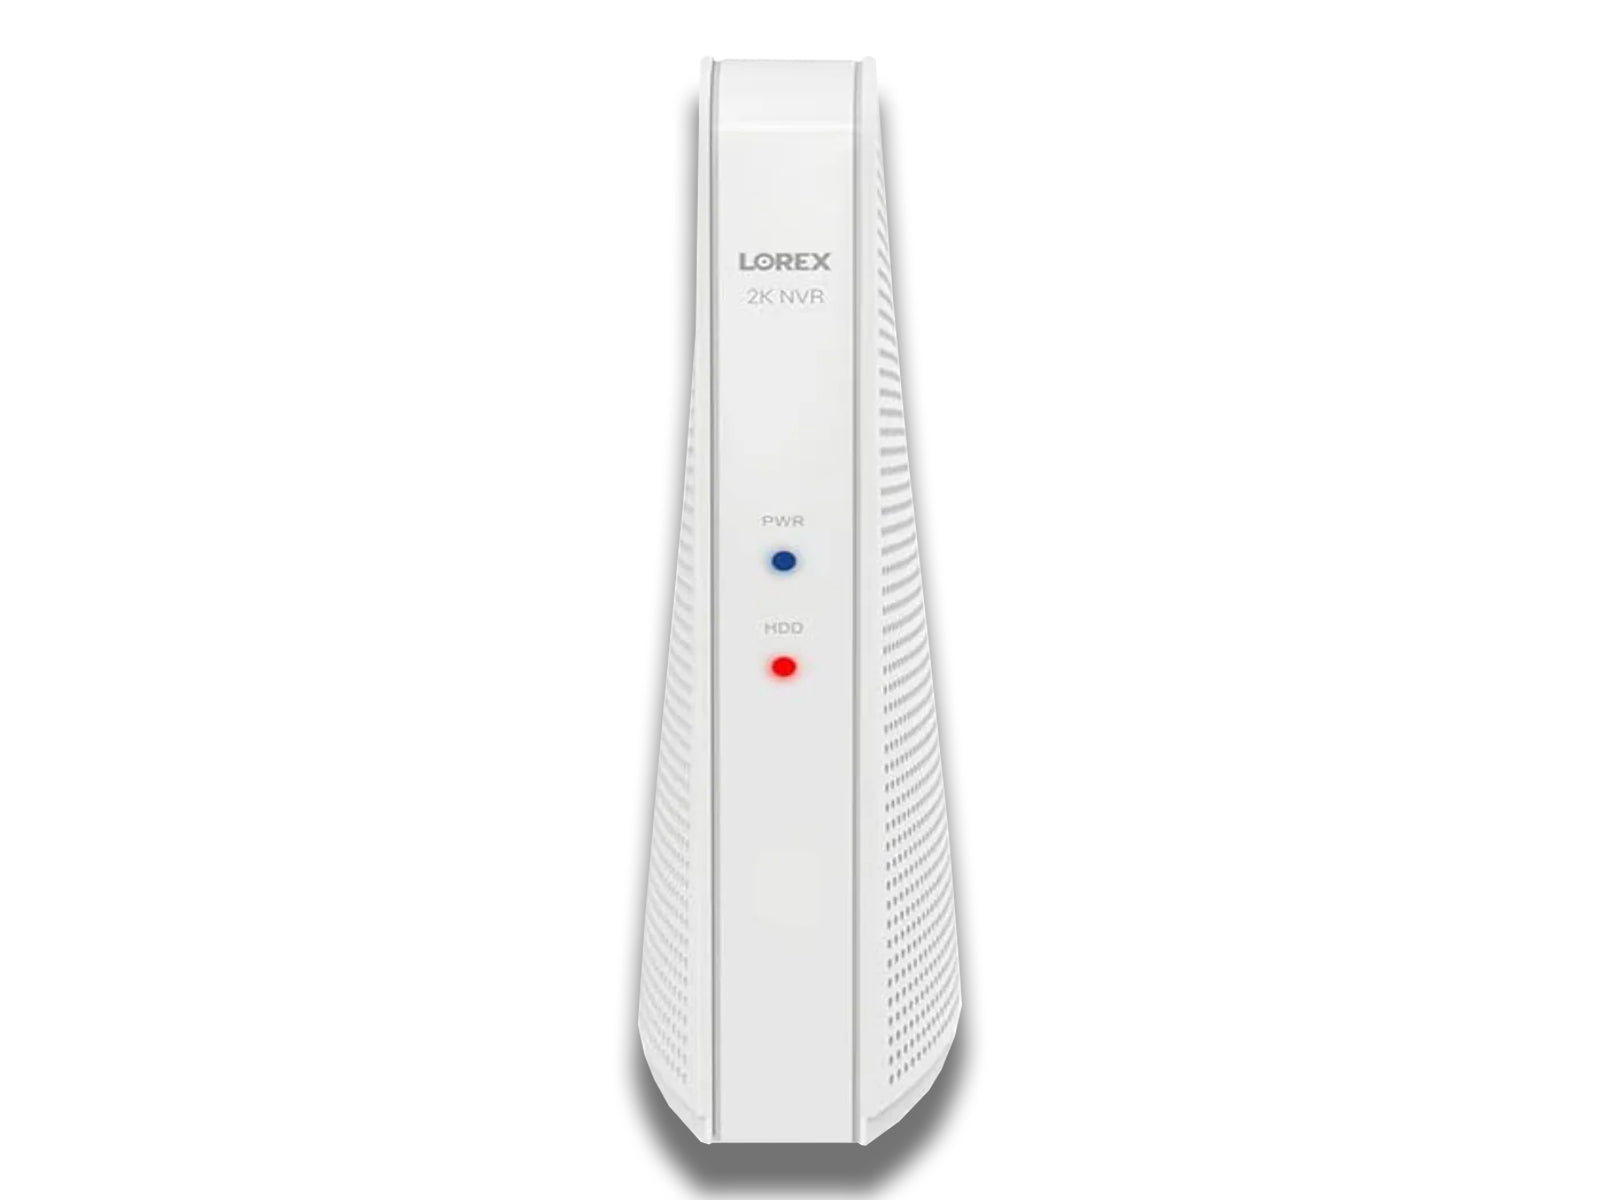 Image shows the frount veiw of the lorex nvr on a white background